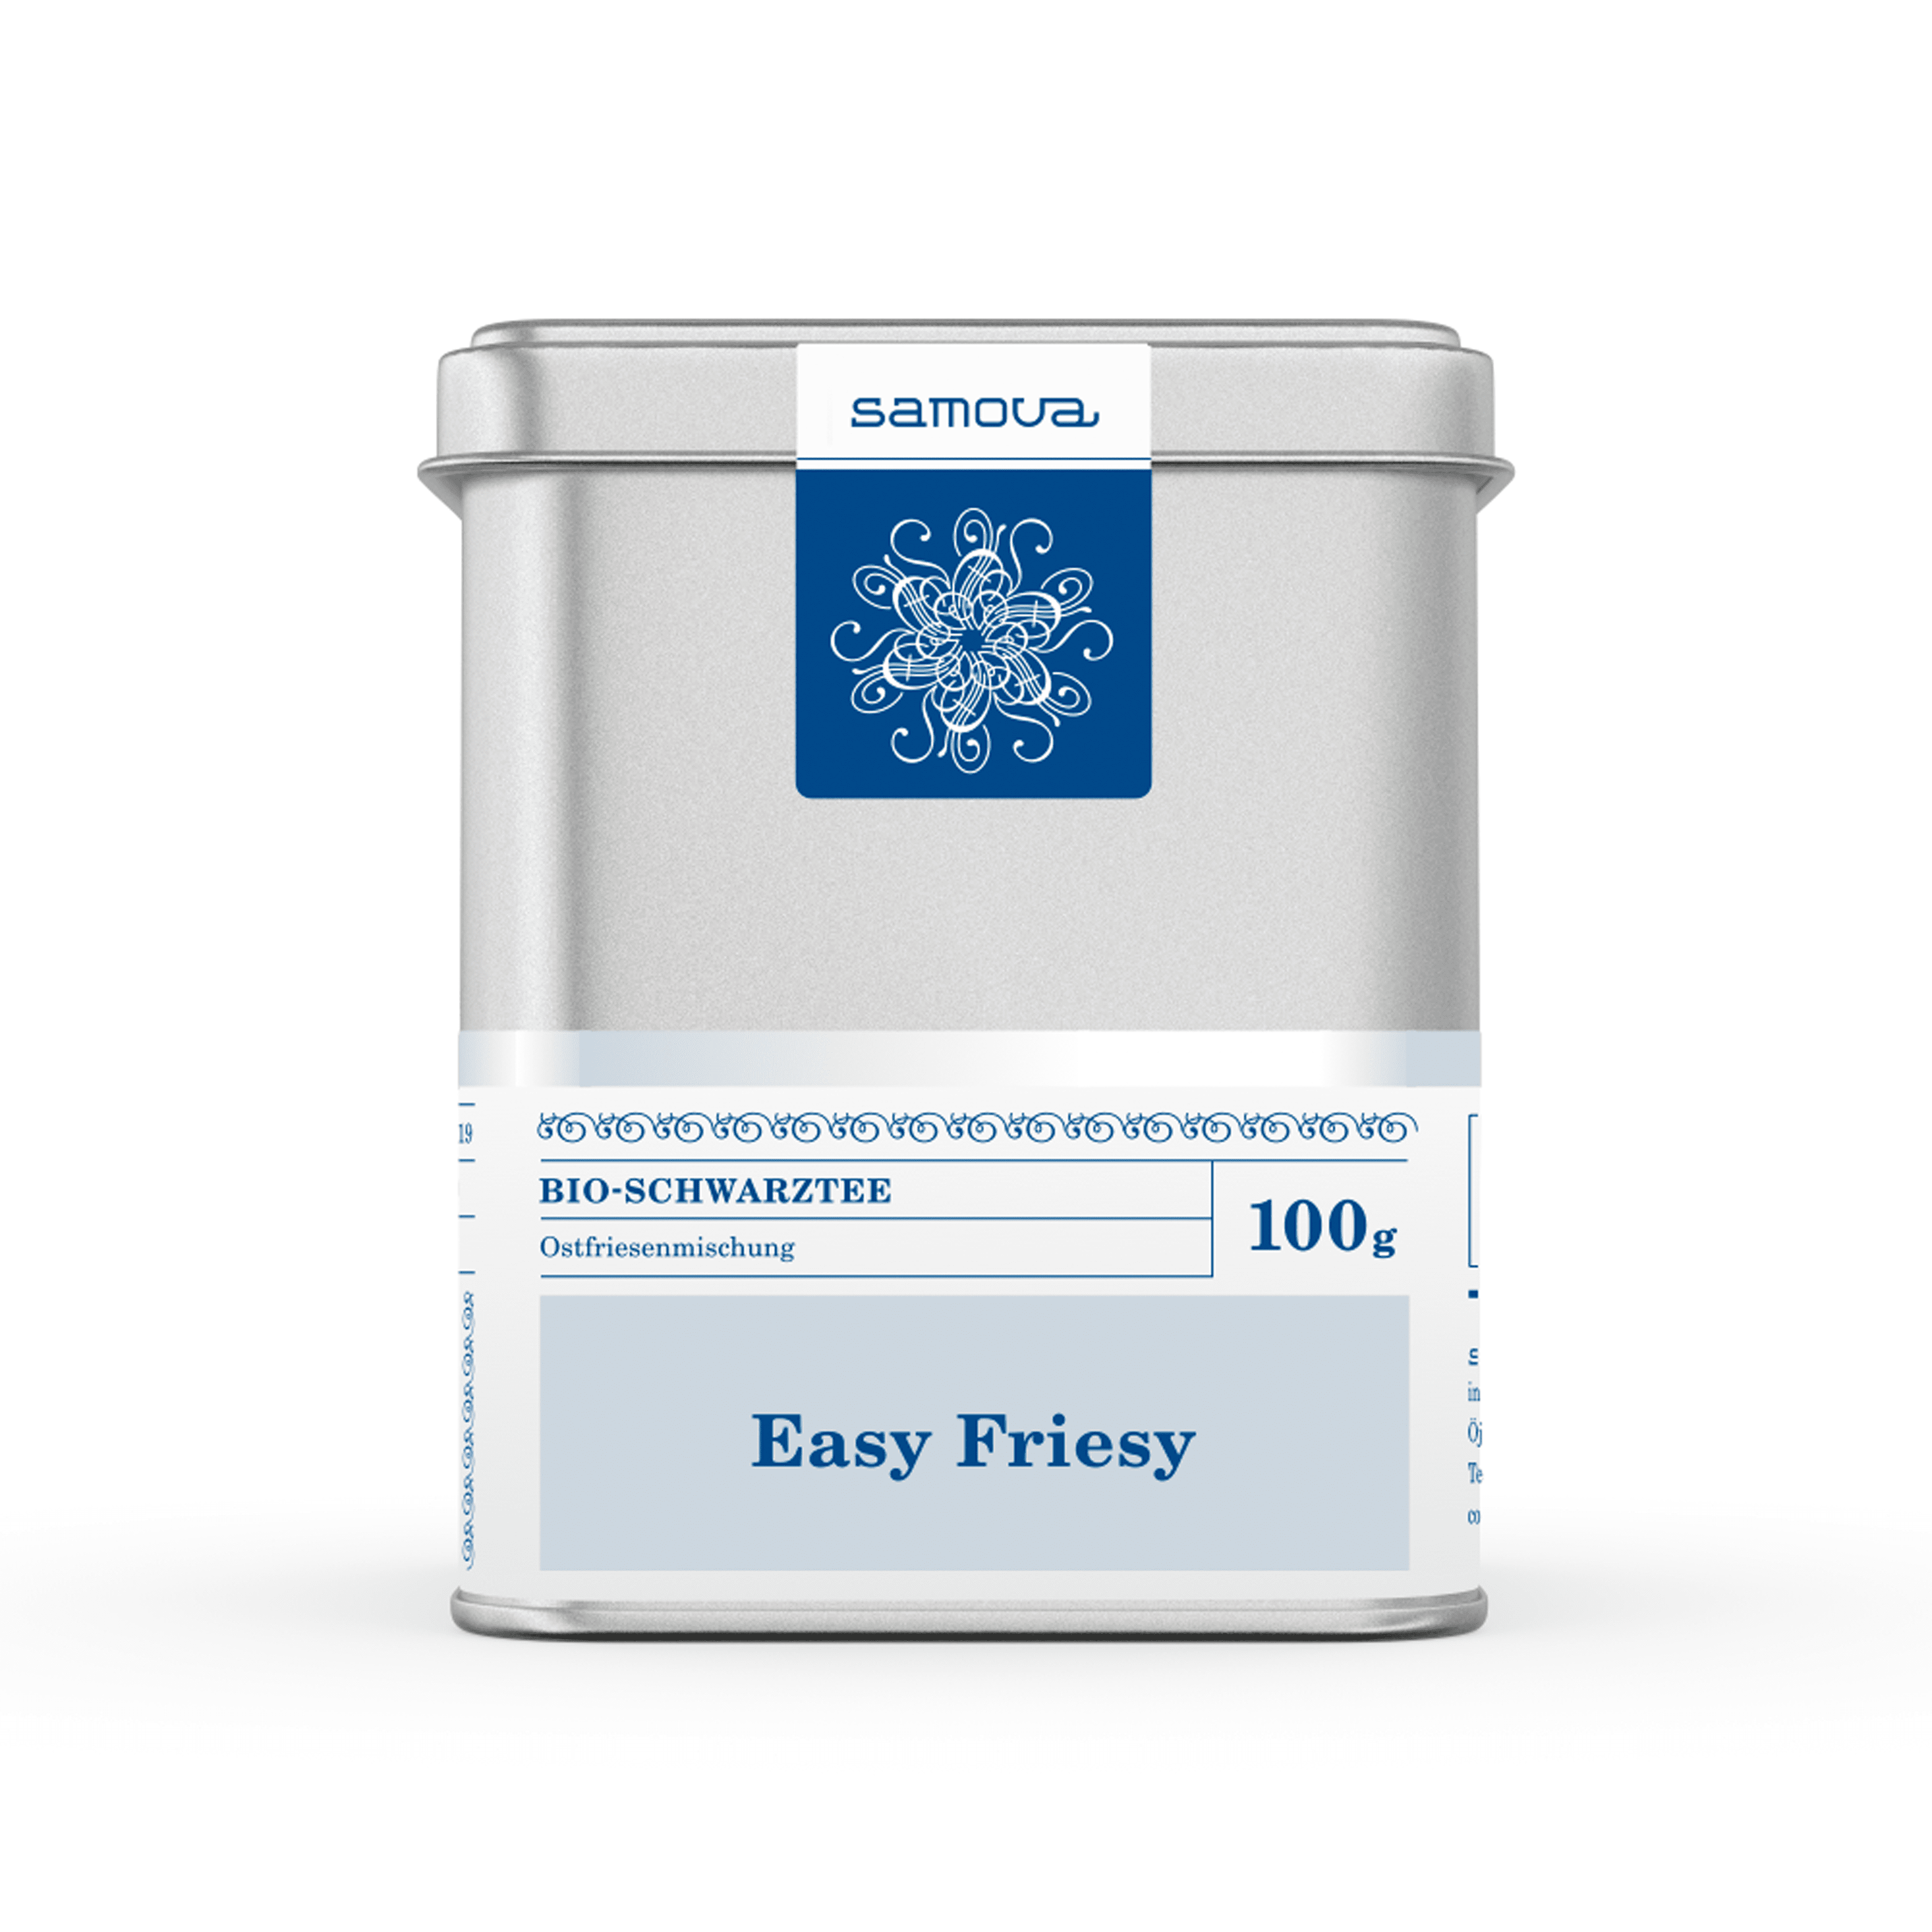 Can of Easy Friesy tea